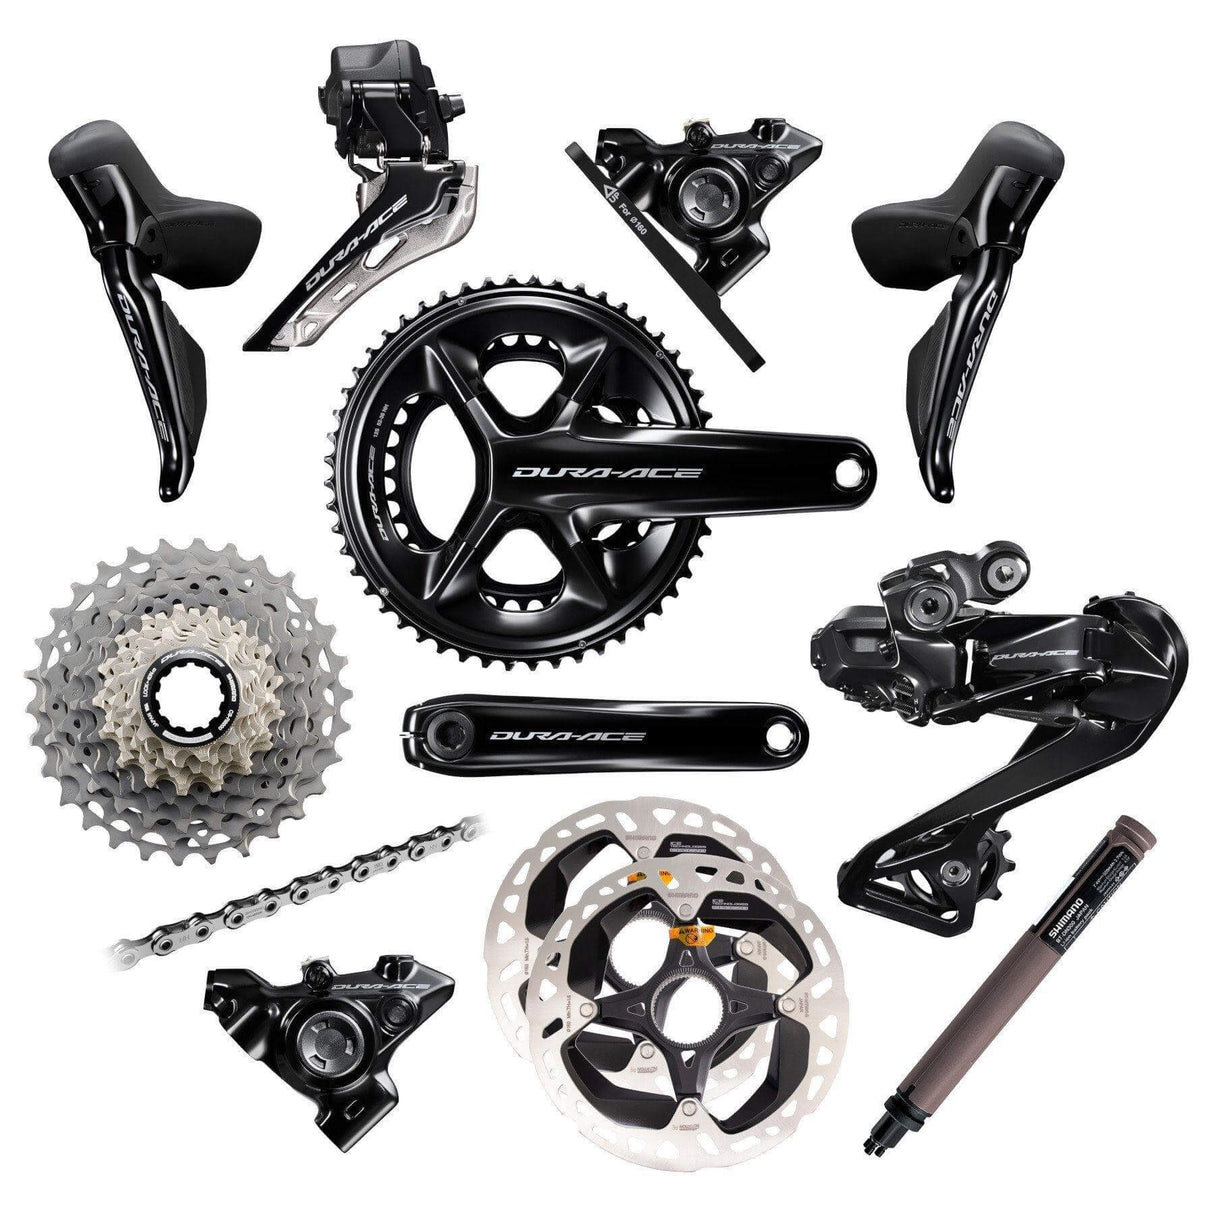 Shimano Dura-Ace Di2 R9270 Groupset | Strictly Bicycles